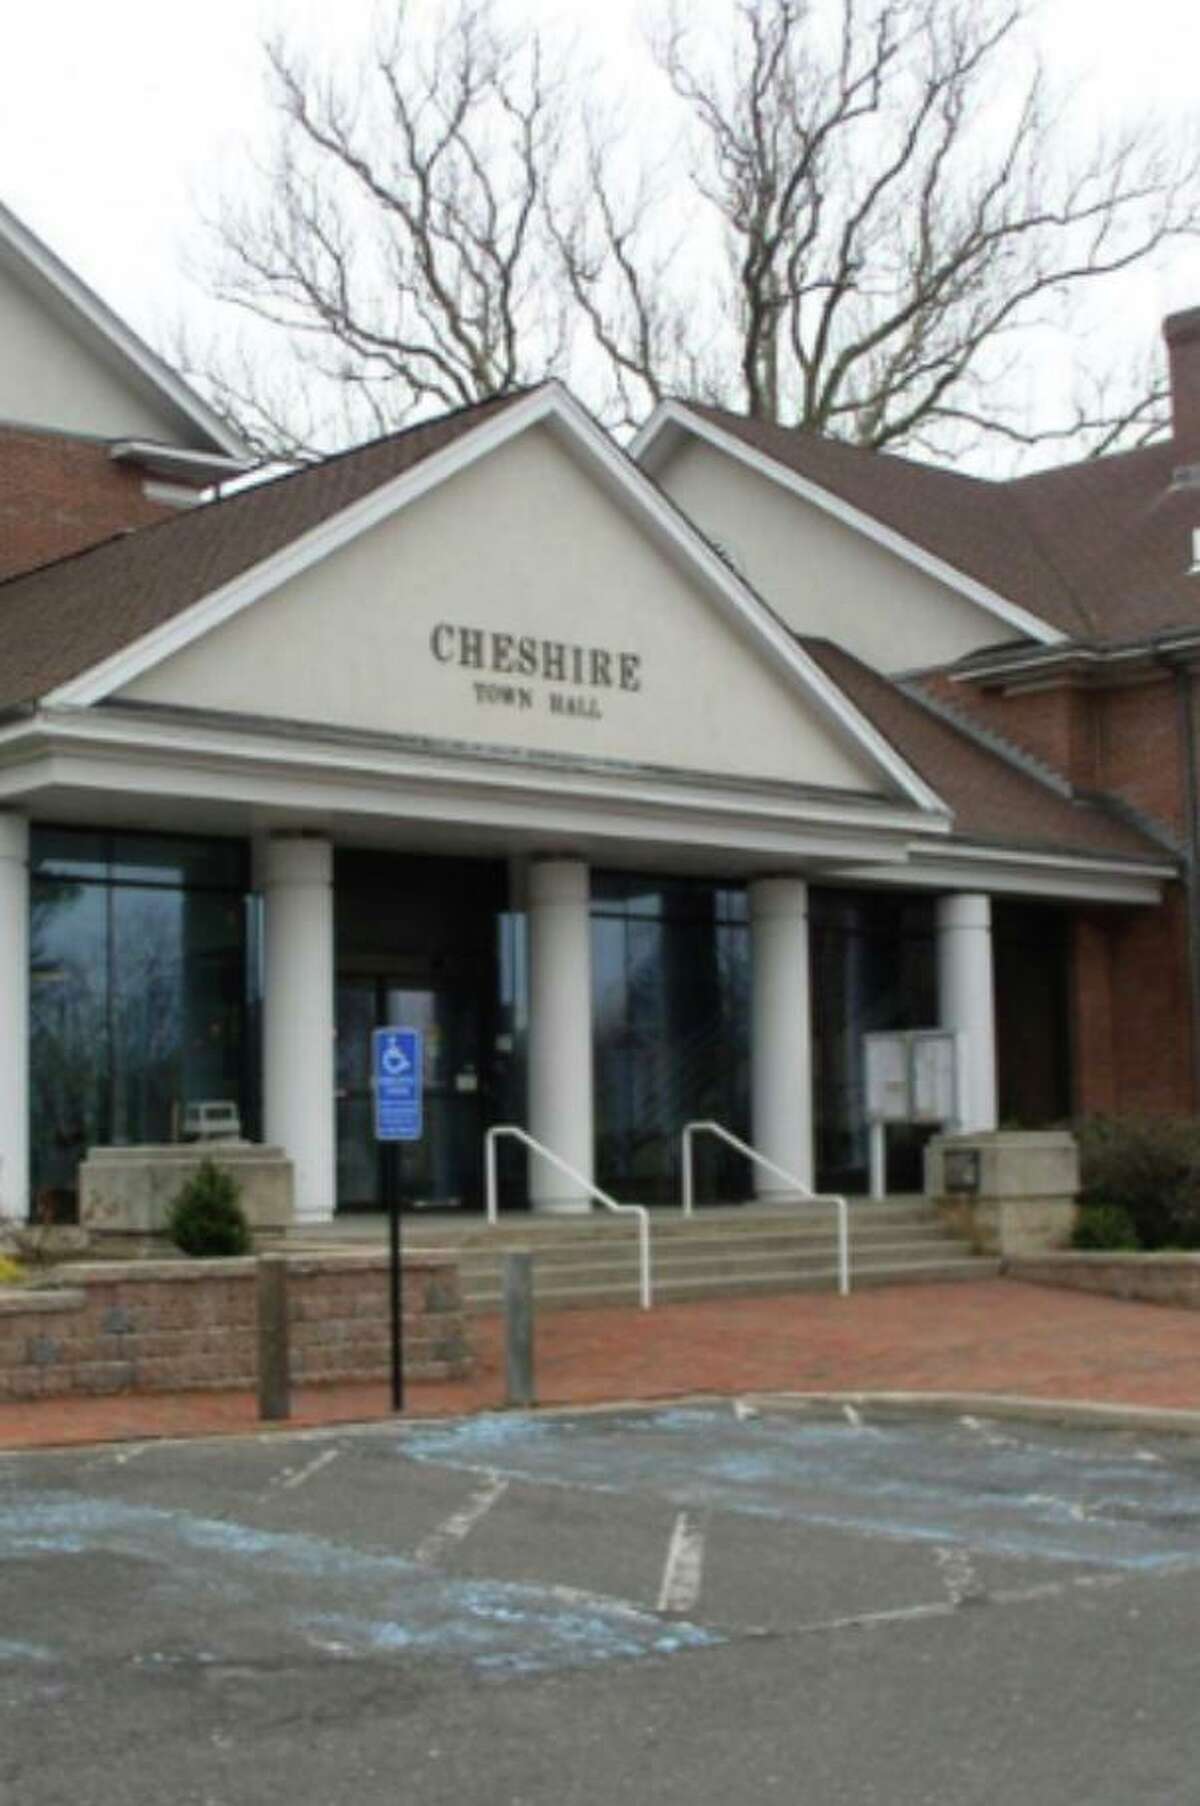 Cheshire Town Hall